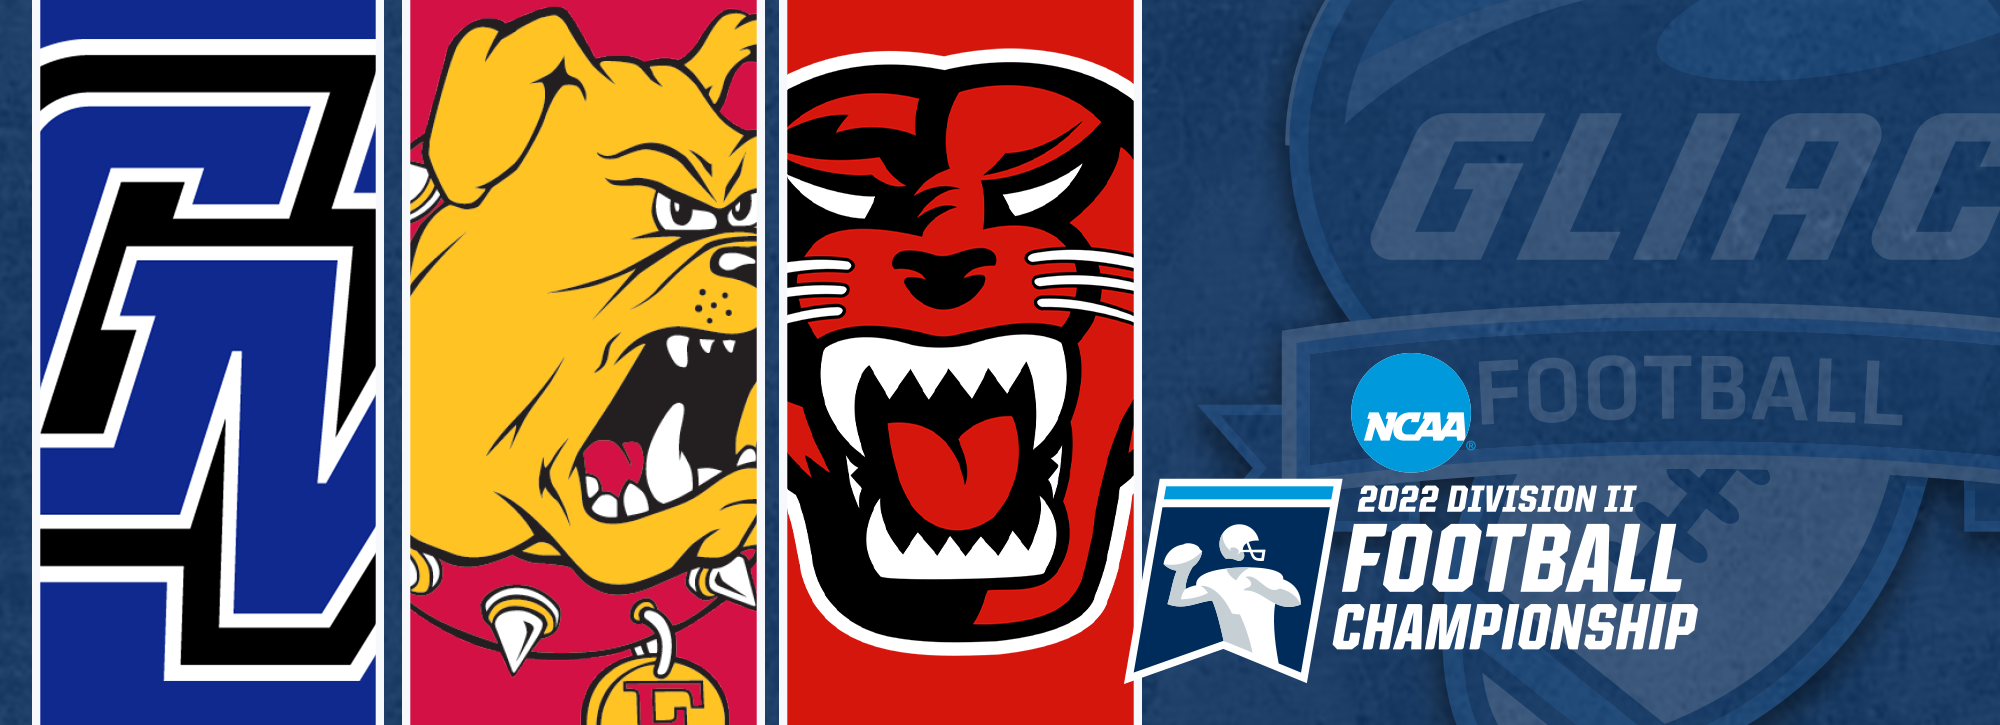 Grand Valley State, Ferris State and Davenport earn bids to NCAA Division II Football Championship